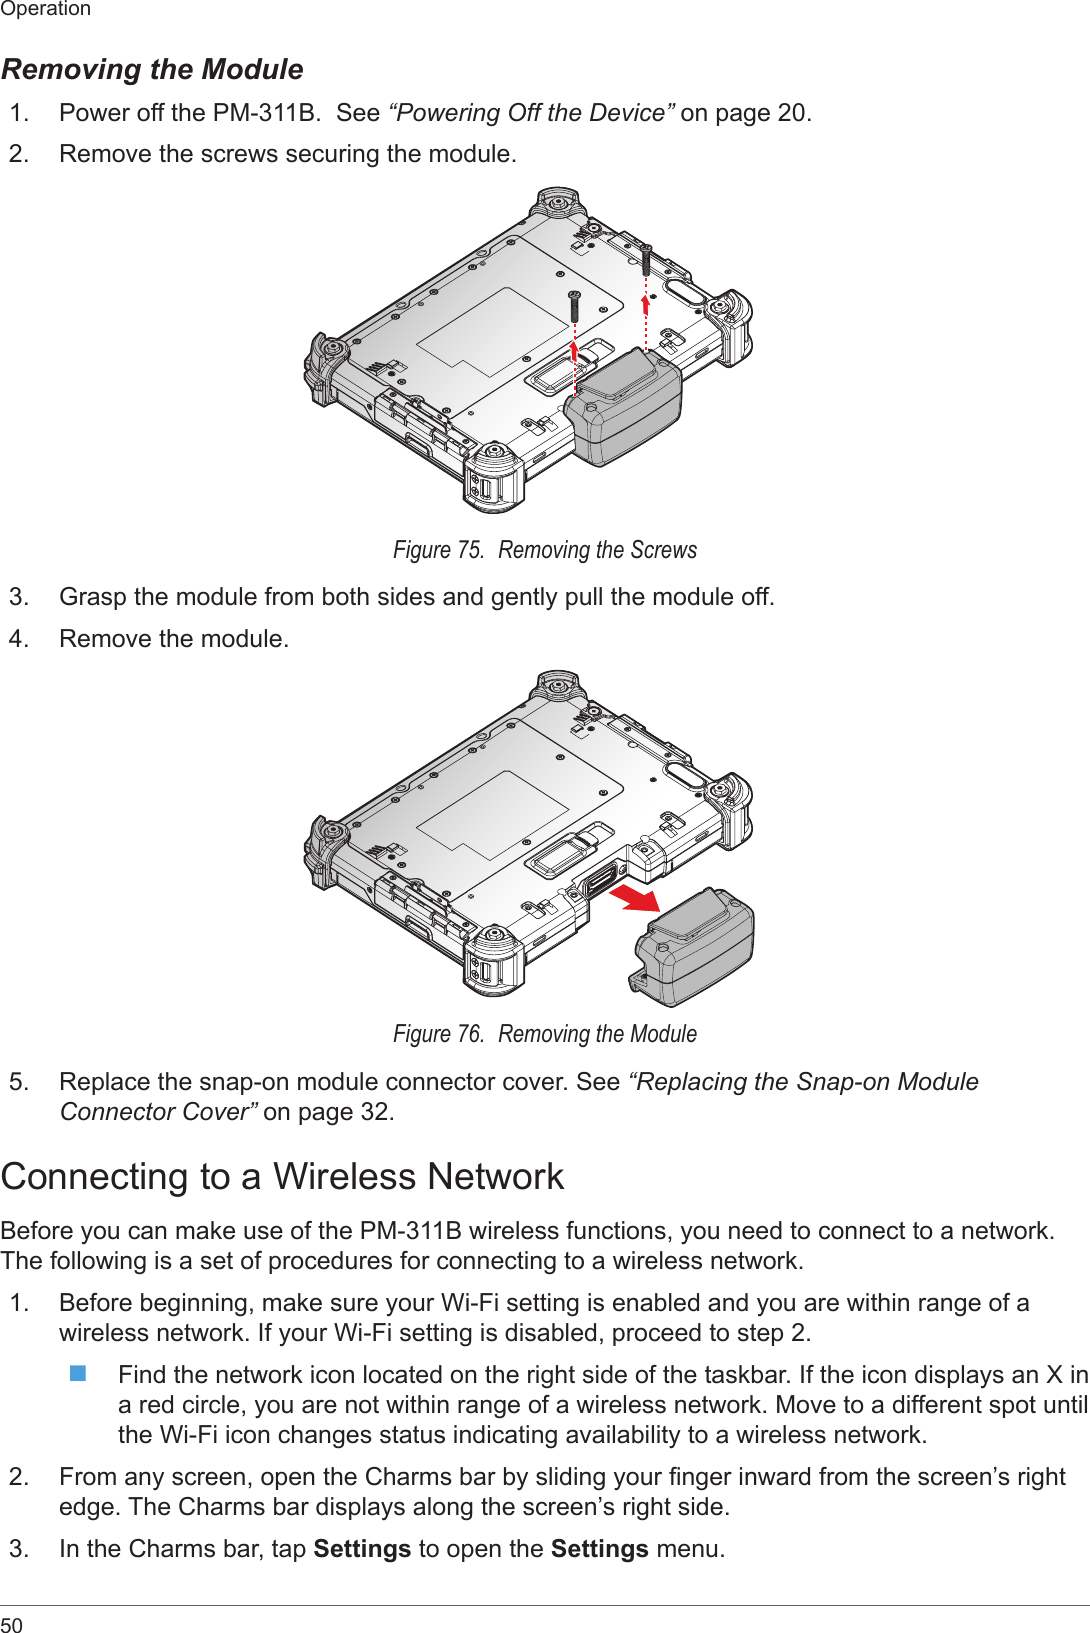 50OperationRemoving the Module1.  Power off the PM-311B.  See “Powering Off the Device” on page 20.2.  Remove the screws securing the module.Figure 75.  Removing the Screws3.  Grasp the module from both sides and gently pull the module off. 4.  Remove the module.Figure 76.  Removing the Module5.  Replace the snap-on module connector cover. See “Replacing the Snap-on Module Connector Cover” on page 32.Connecting to a Wireless NetworkBefore you can make use of the PM-311B wireless functions, you need to connect to a network. The following is a set of procedures for connecting to a wireless network.1.  Before beginning, make sure your Wi-Fi setting is enabled and you are within range of a wireless network. If your Wi-Fi setting is disabled, proceed to step 2. Find the network icon located on the right side of the taskbar. If the icon displays an X in a red circle, you are not within range of a wireless network. Move to a different spot until the Wi-Fi icon changes status indicating availability to a wireless network.2.  From any screen, open the Charms bar by sliding your nger inward from the screen’s right edge. The Charms bar displays along the screen’s right side.3.  In the Charms bar, tap Settings to open the Settings menu.